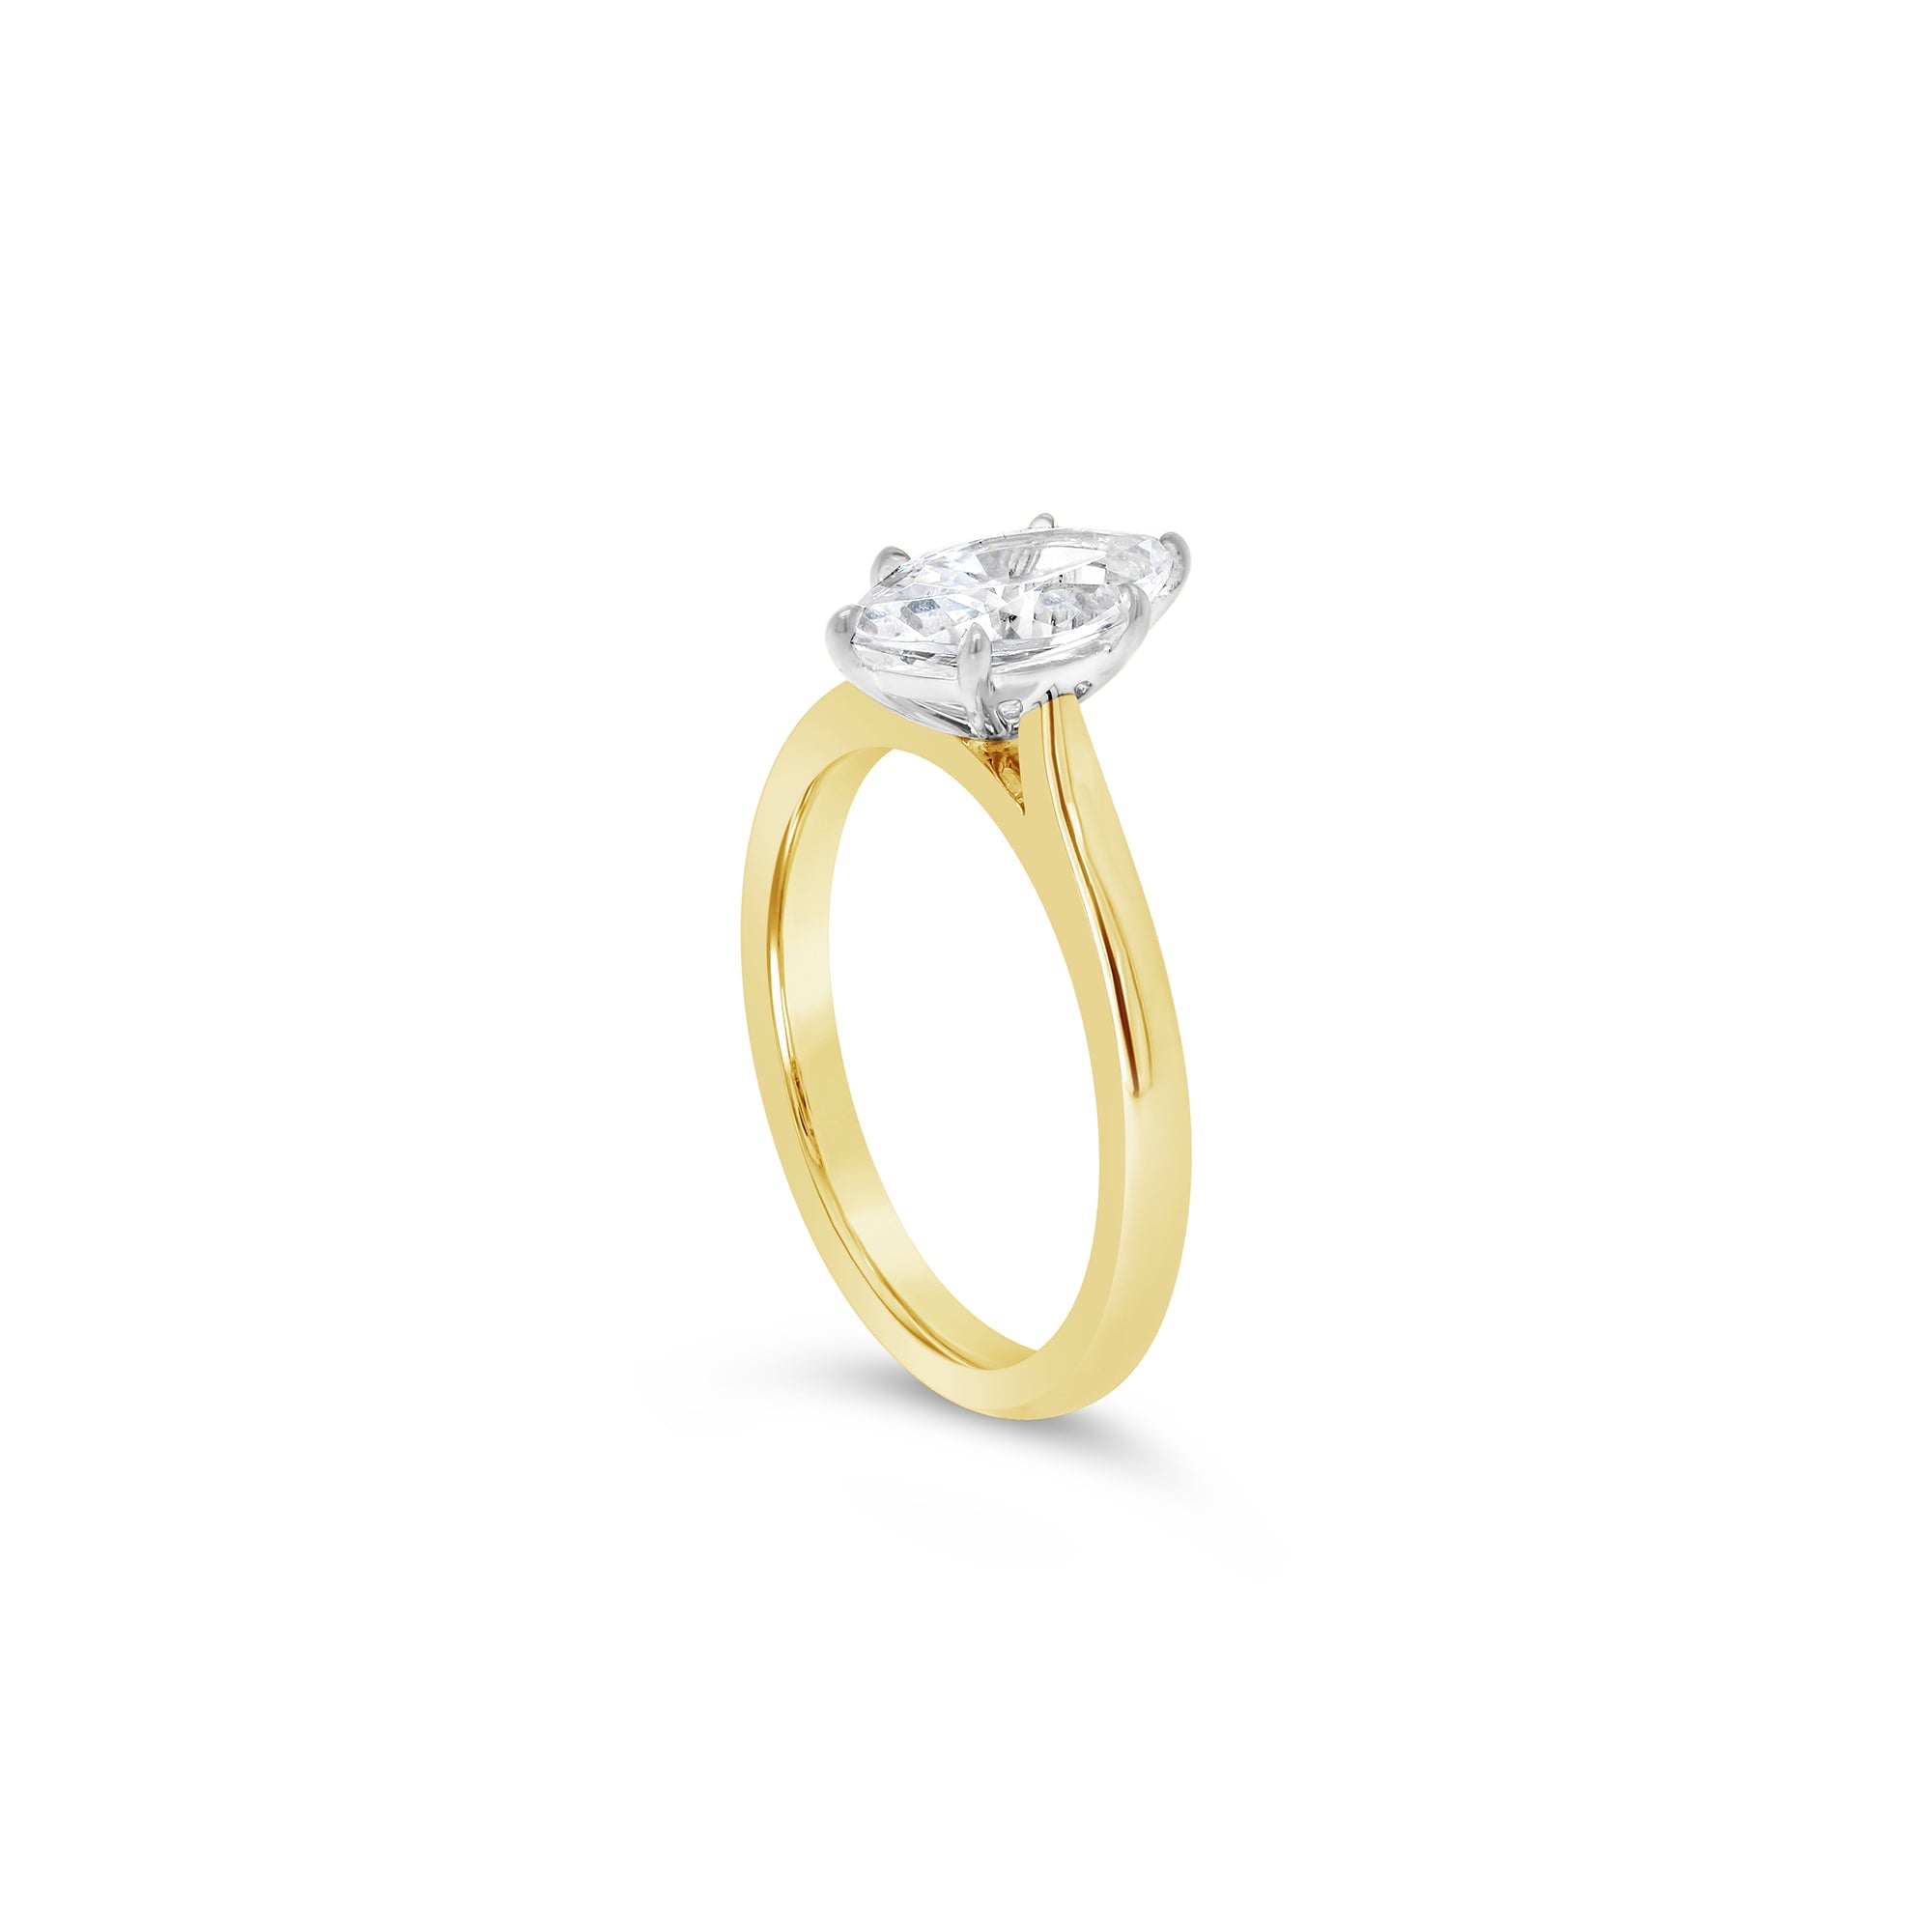 Marquise Cut Solitaire Diamond Engagement Ring yellow gold